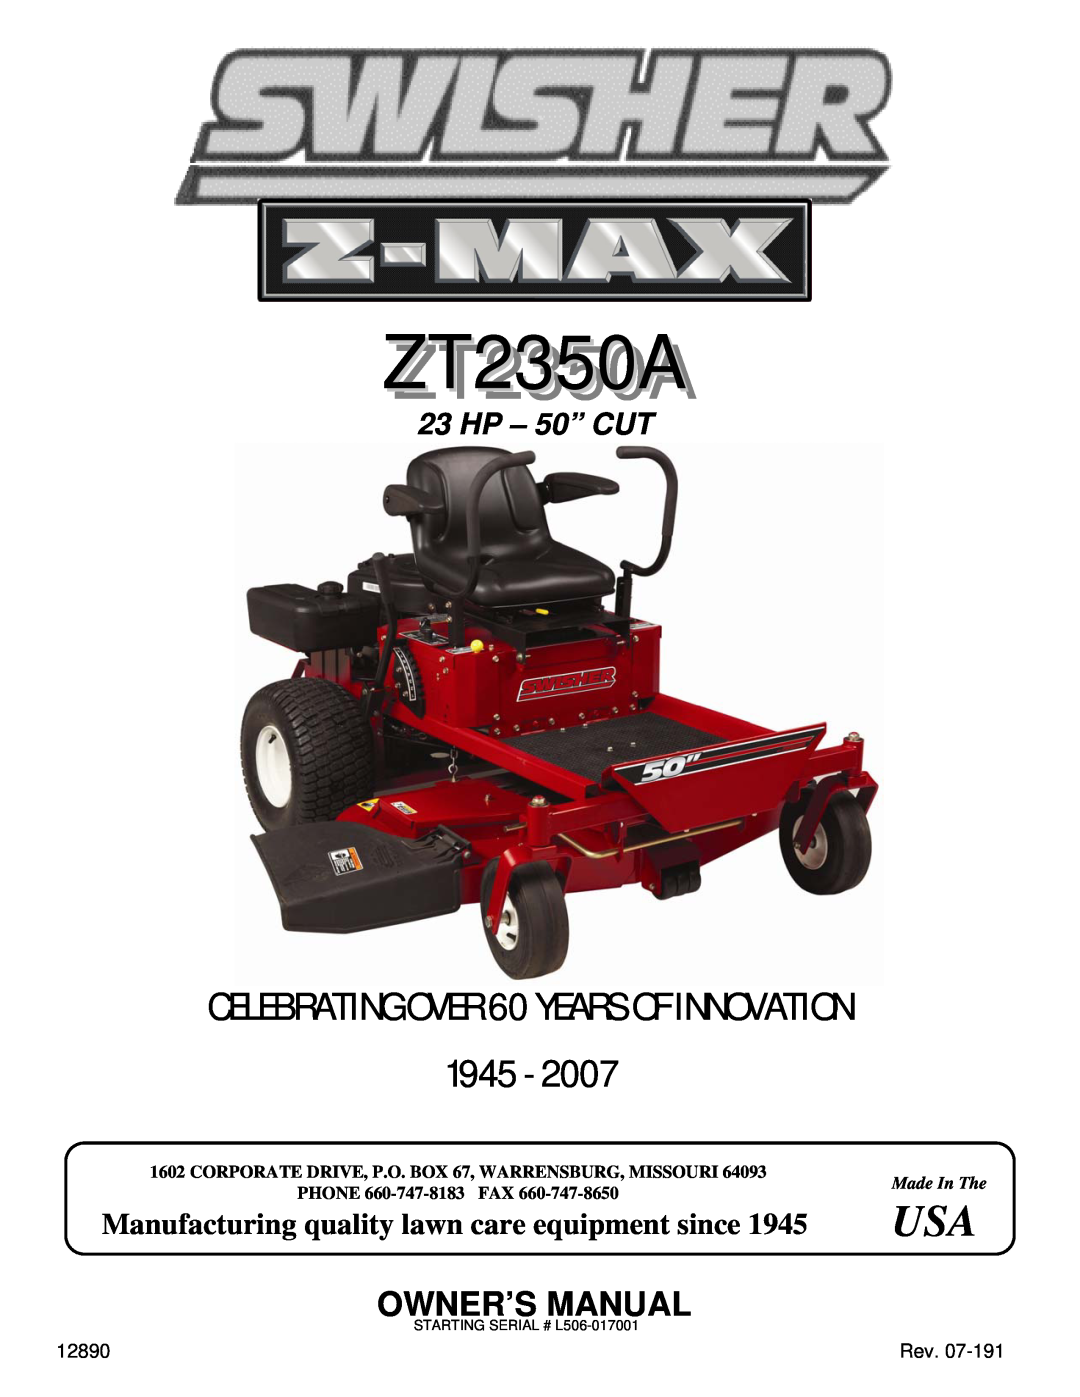 Swisher ZT2350A manual CELEBRATING OVER 60 YEARS OF INNOVATION, HP - 50” CUT, Made In The, PHONE 660-747-8183 FAX 